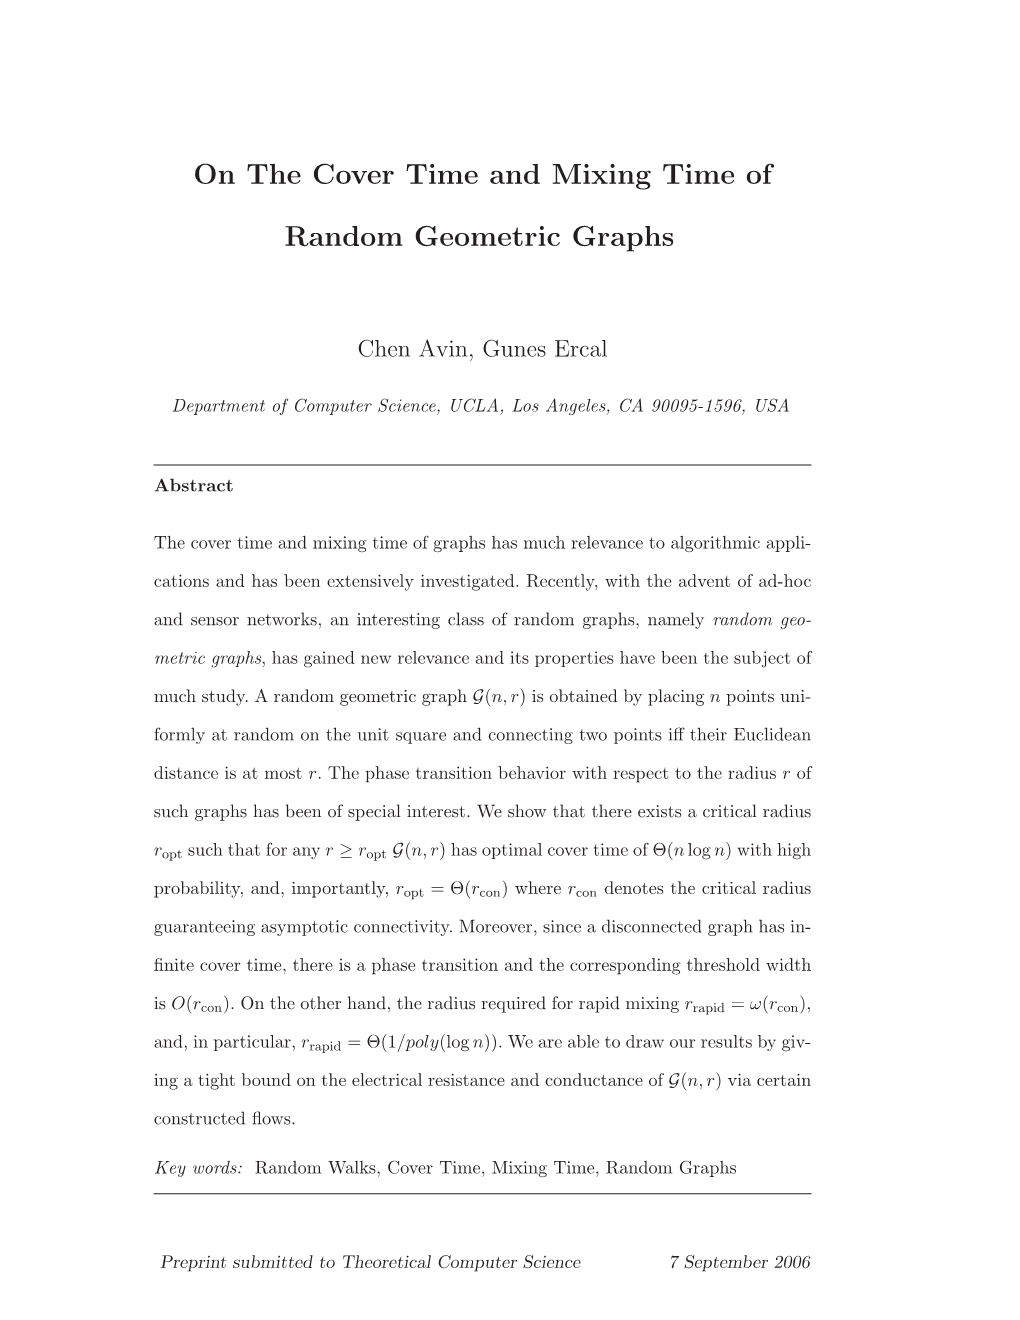 On the Cover Time and Mixing Time of Random Geometric Graphs